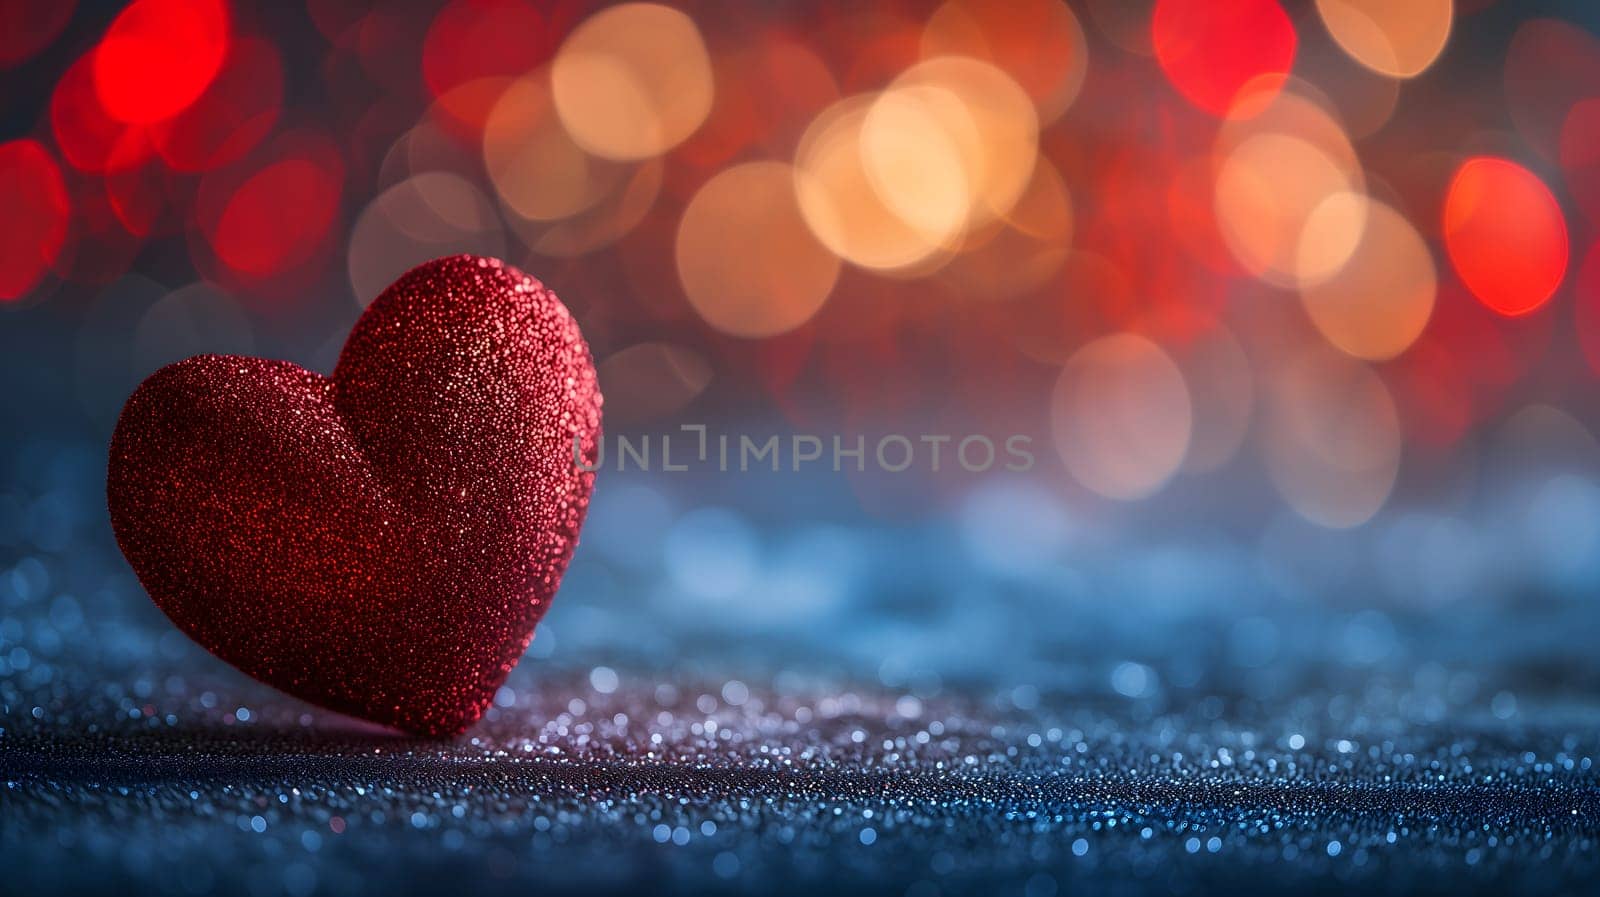 Red heart on table with selective focus and bokeh background for valentine day greeting card. Neural network generated image. Not based on any actual person or scene.